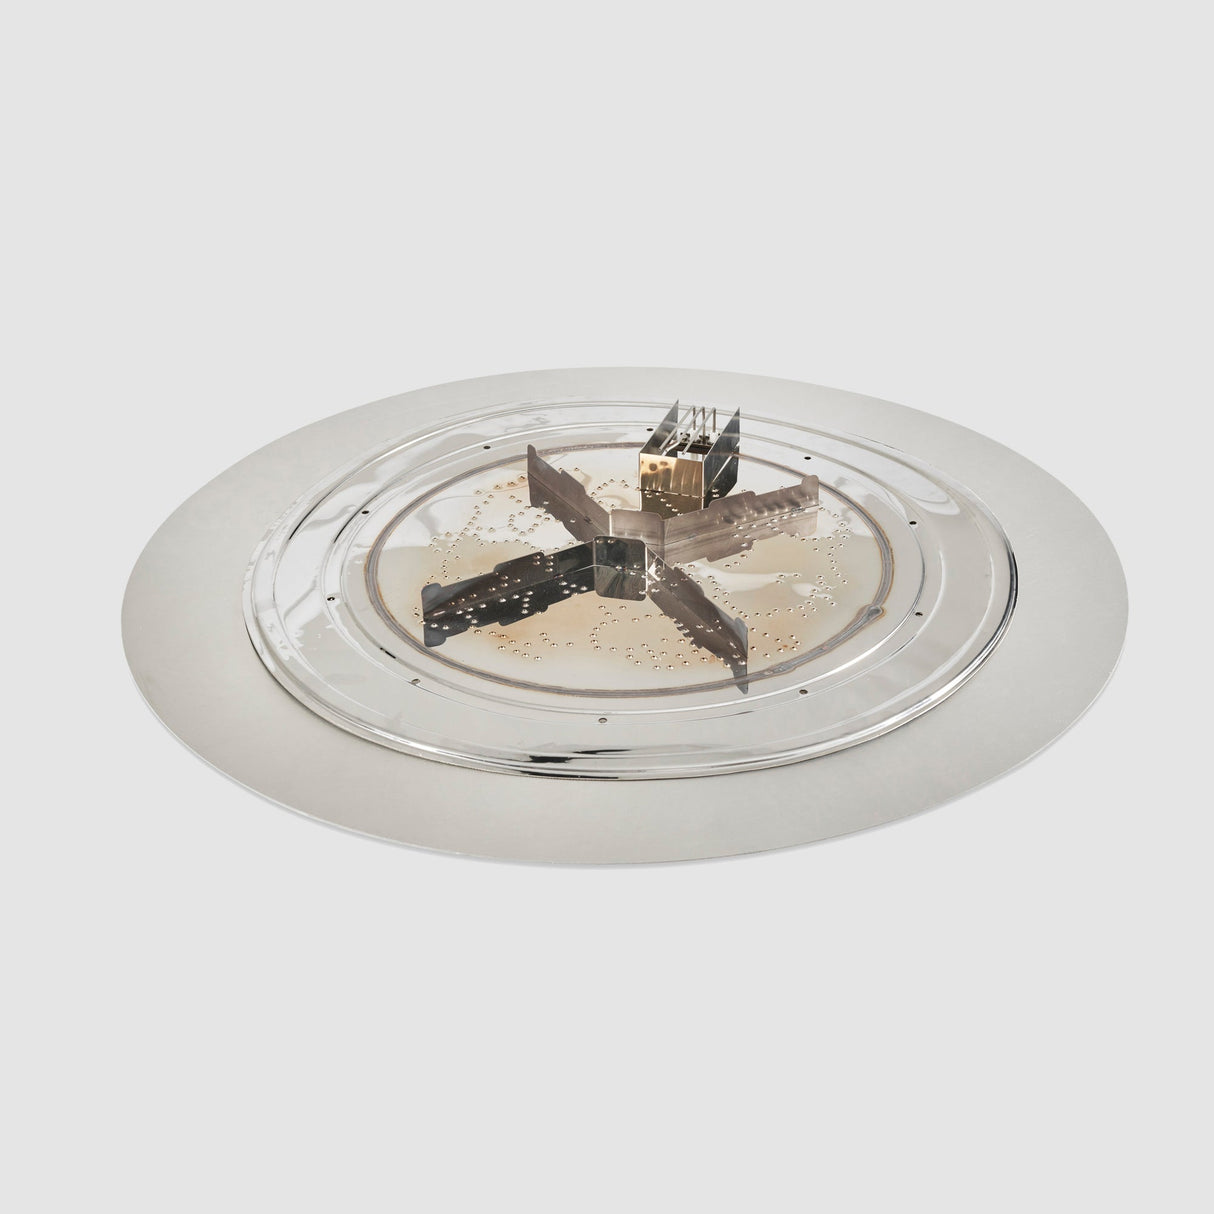 The 36" Crystal Fire Plus Round Gas Burner Insert and Plate Kit with a Direct Spark Ignition on a grey background